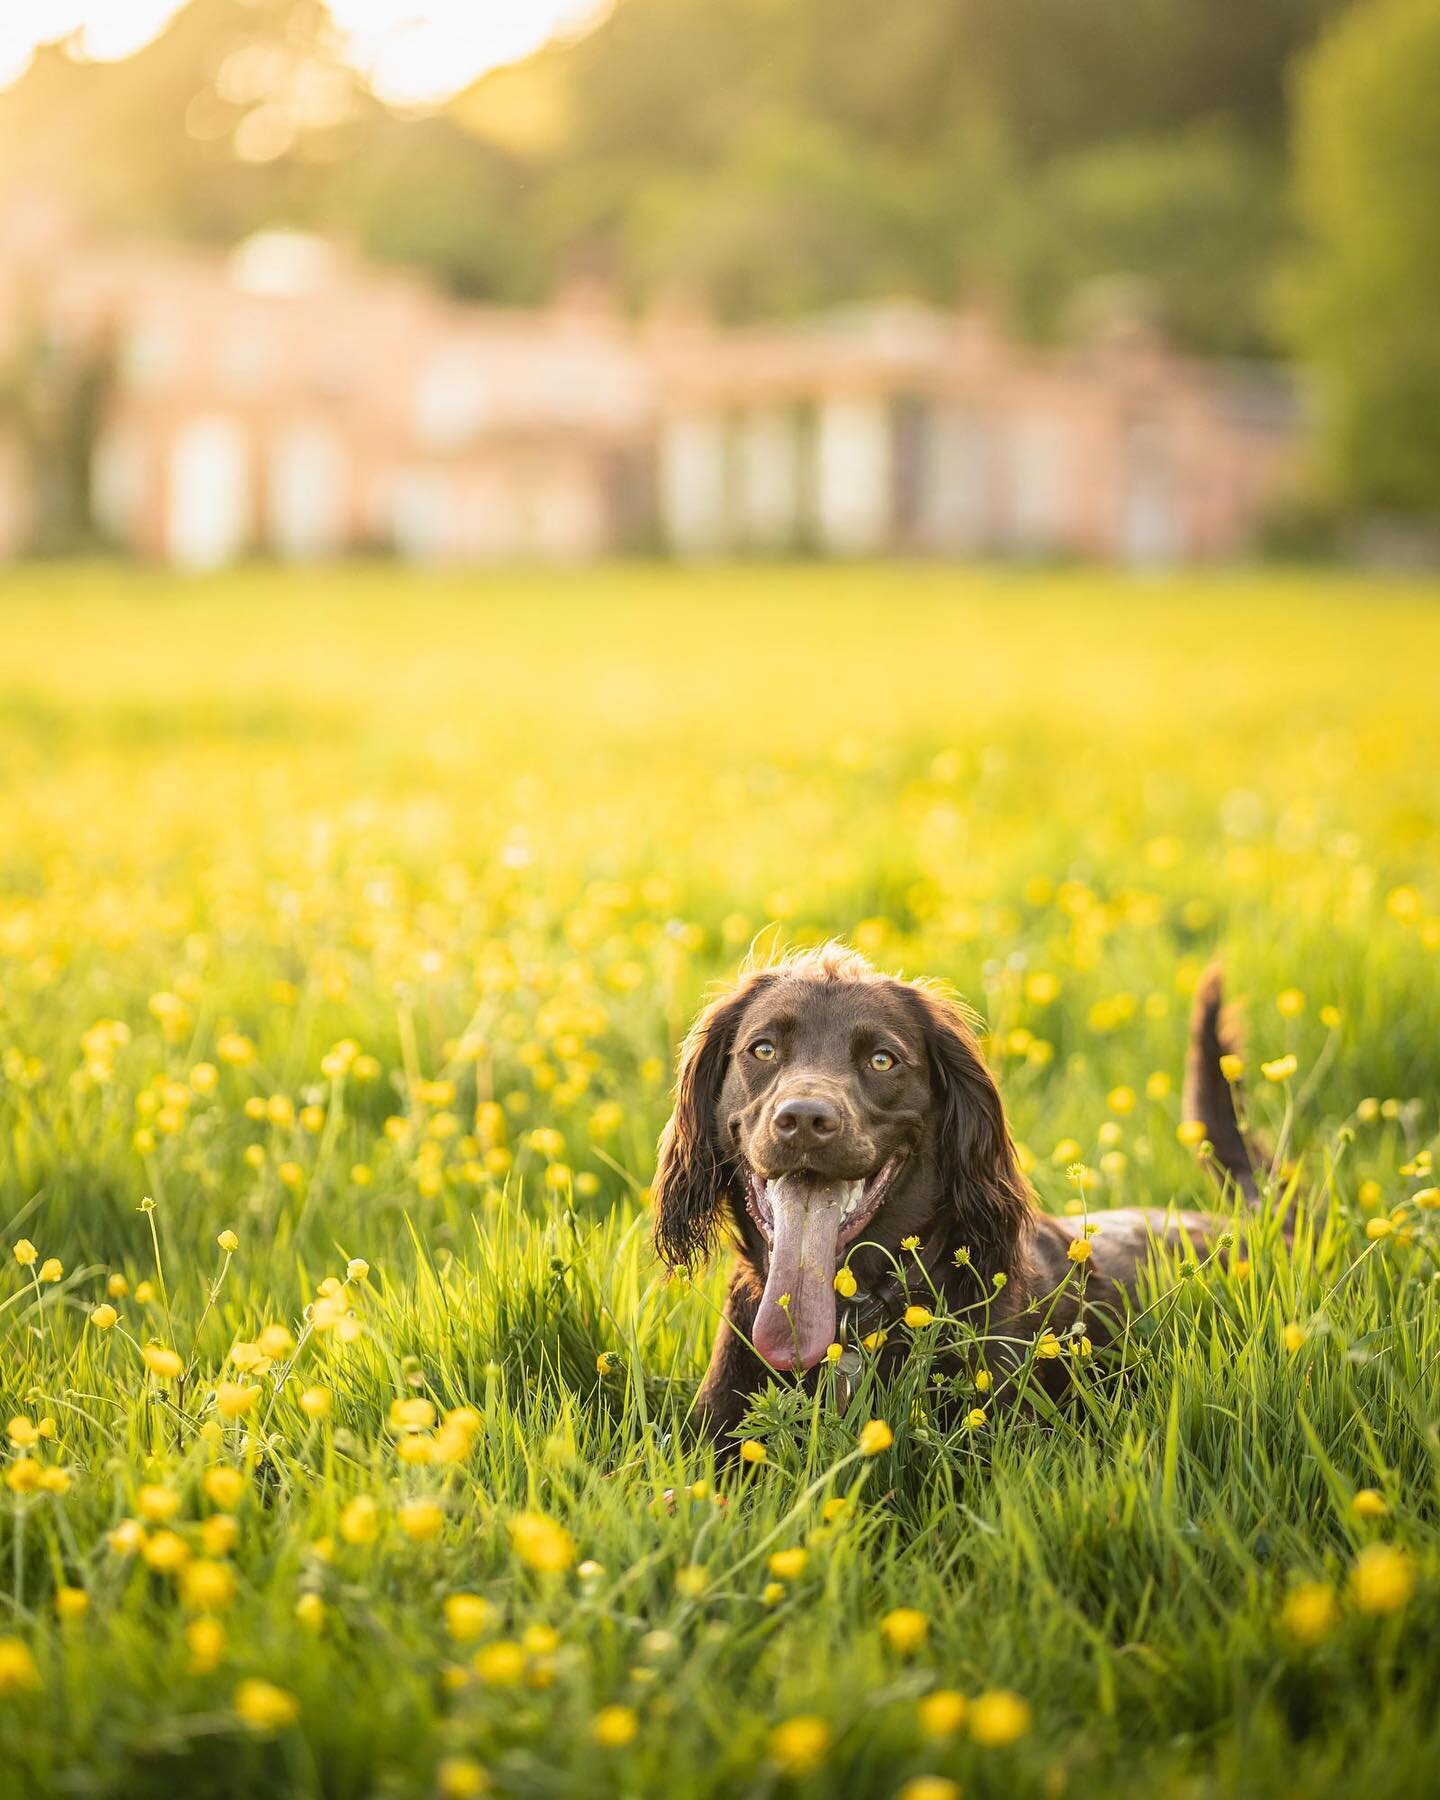 It turns out that Willow is a huge fan of the huge buttercup meadows at @ntkillerton 💛

The display they&rsquo;re giving now is absolutely stunning. I feel so lucky this beautiful estate is just a stone&rsquo;s throw from home. 

@nationaltrust @nat